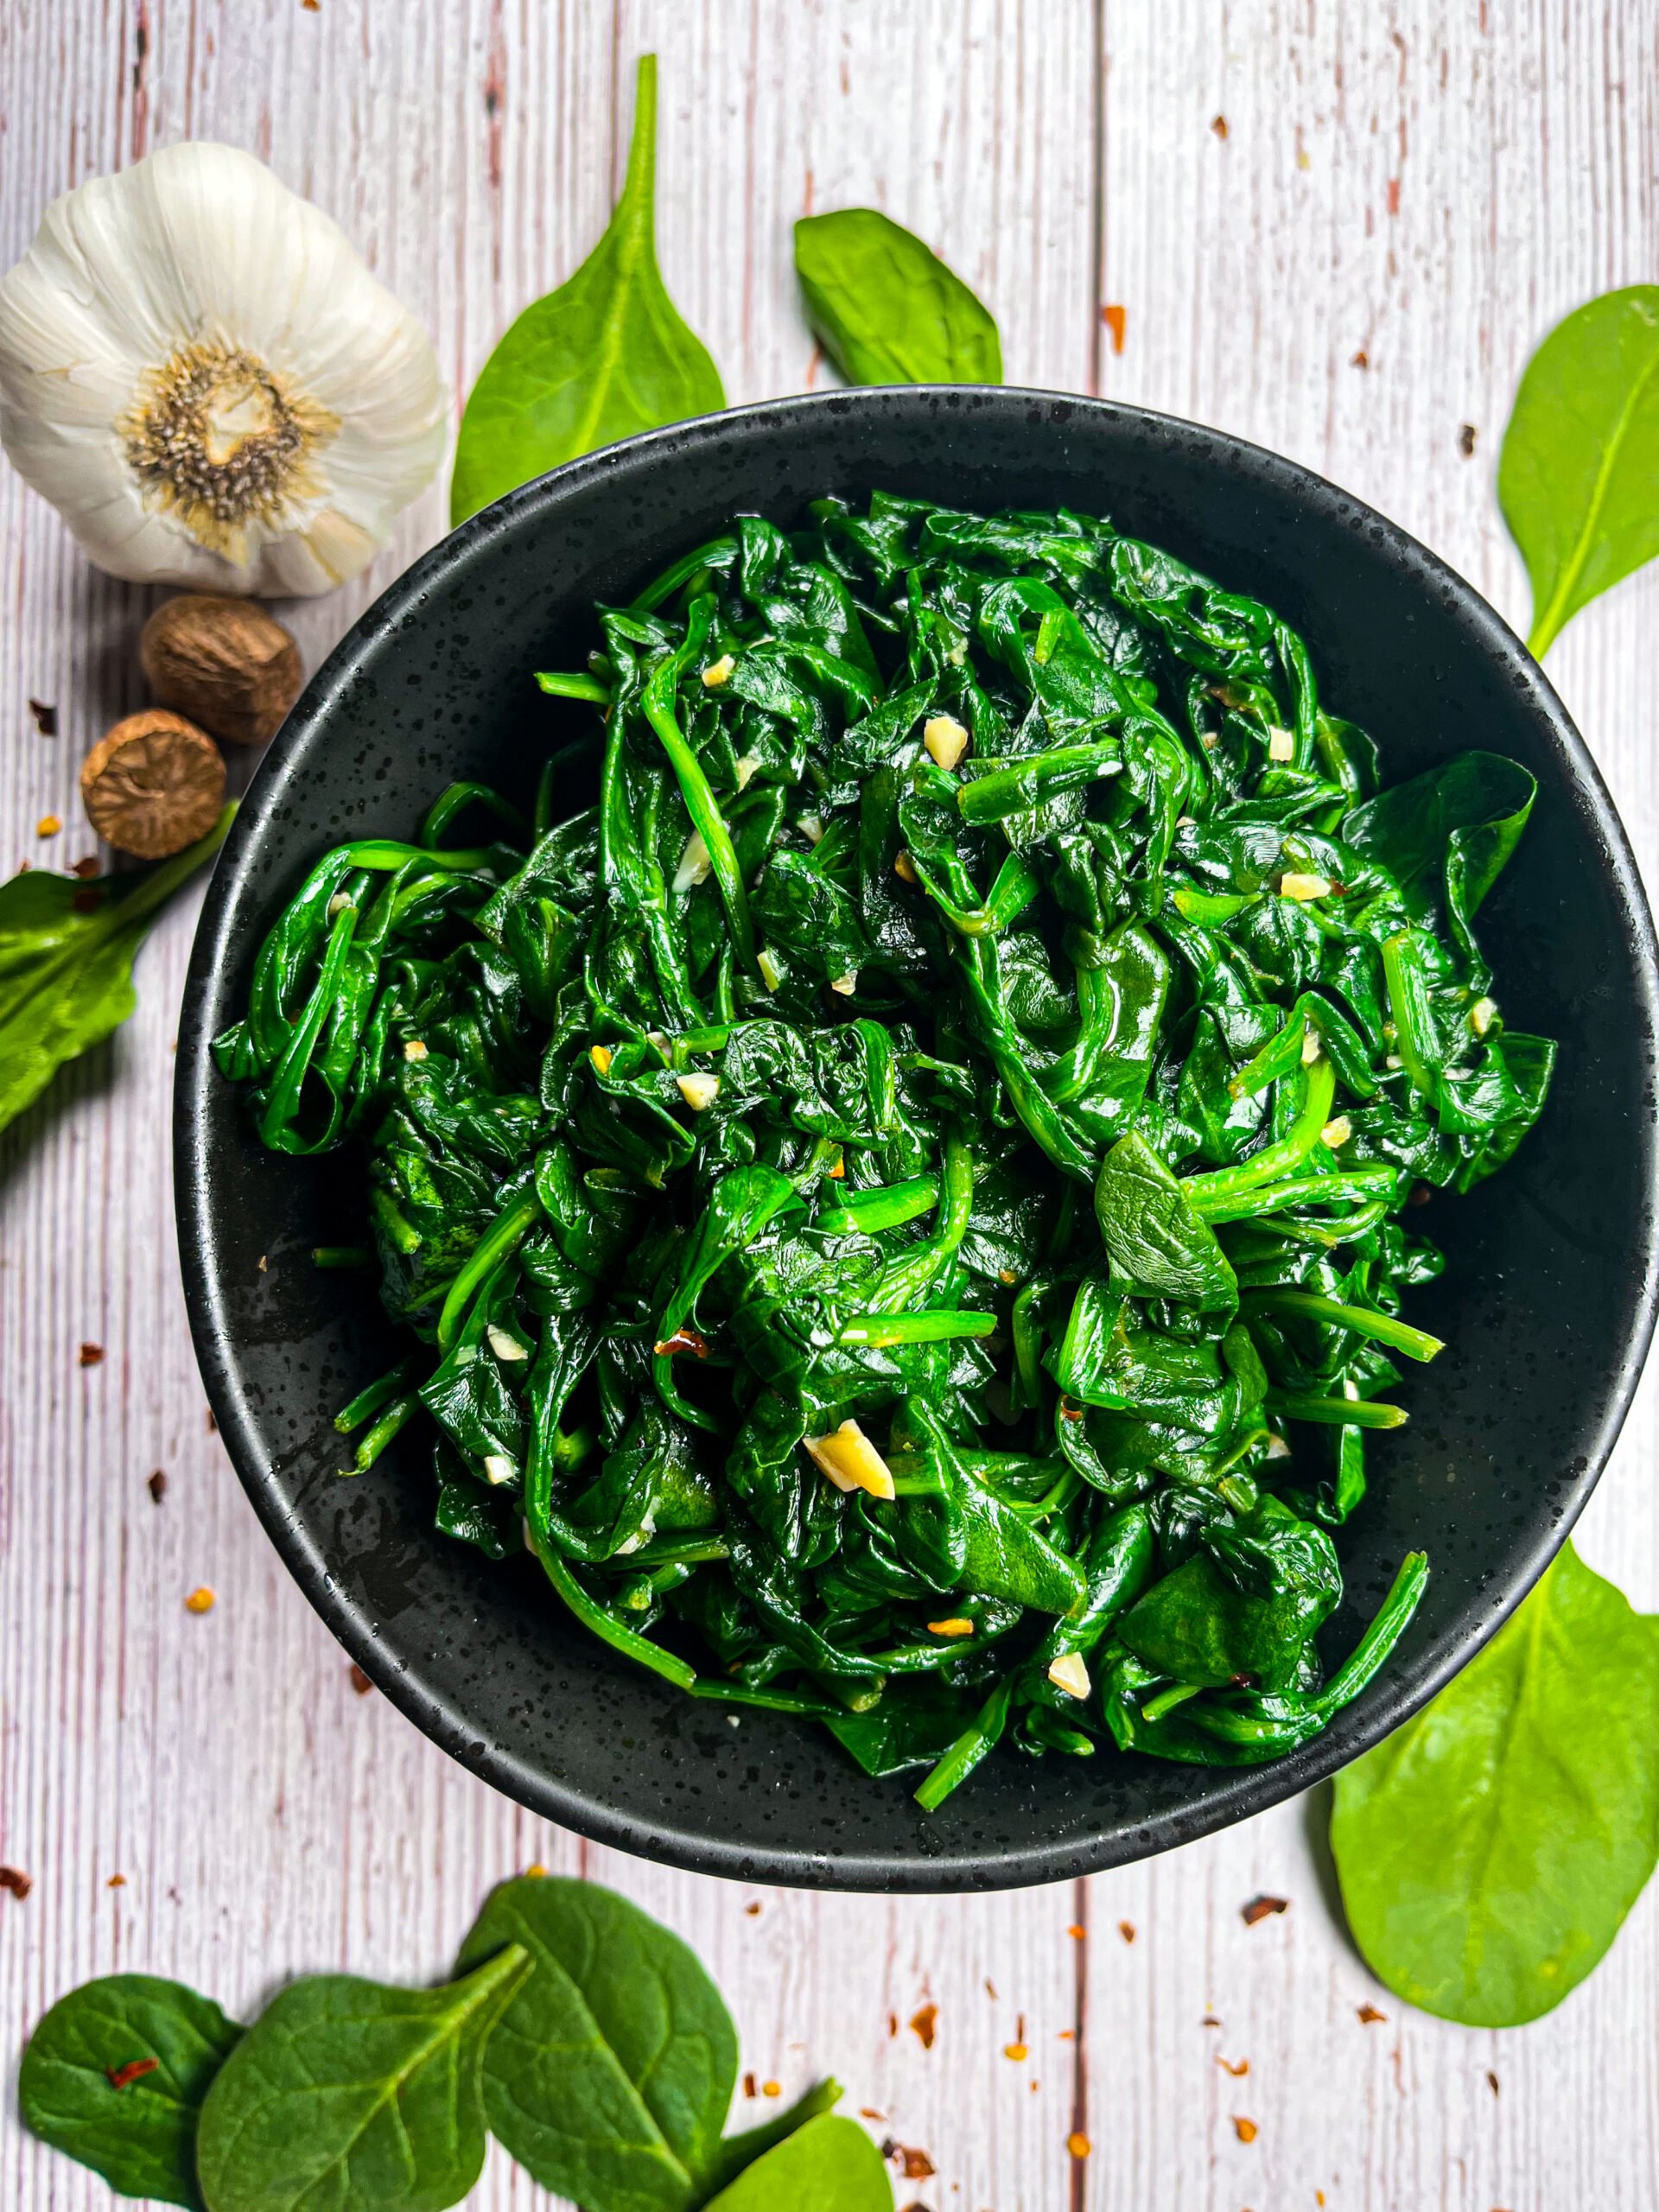 10-Minute Sautéed Spinach (With Garlic)